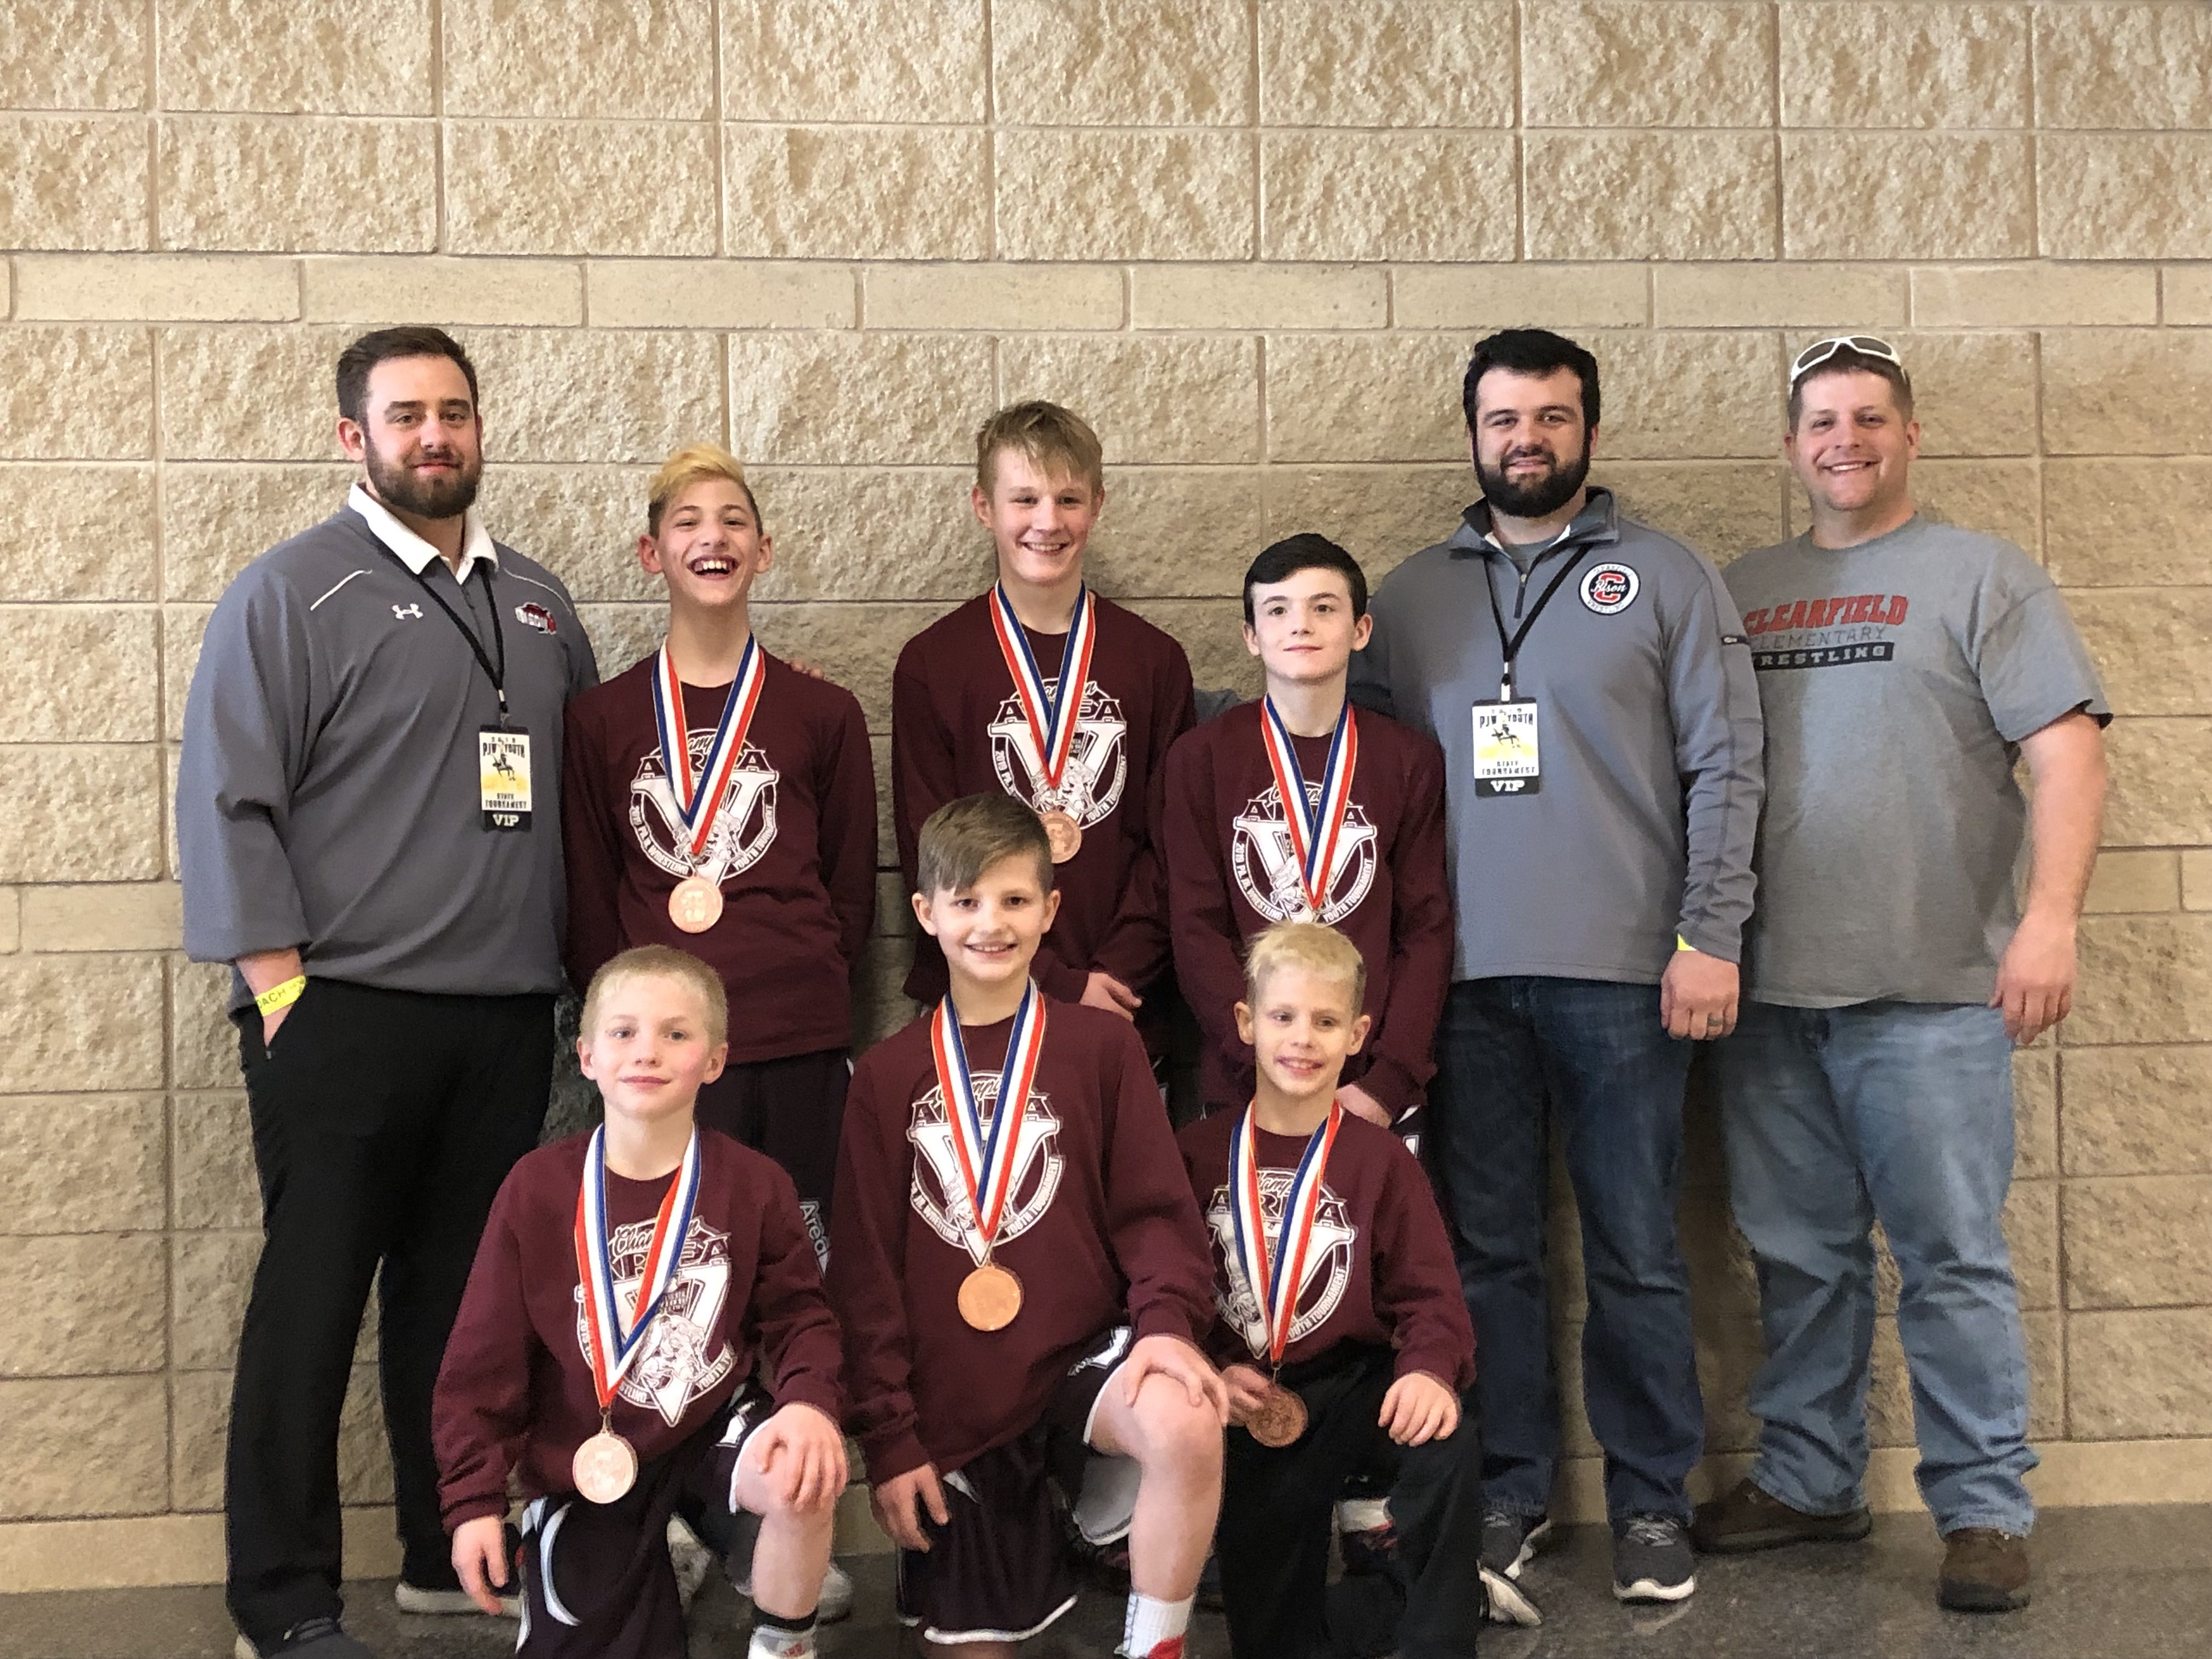 Front left to right Bo Aveni 4th, Colton Bumbarger 8th, Matthew Rowles 6th, back Row Coach Funk, Will Domico 7th, Carter Chamberlain 3rd, Brady Collins 2nd, Coach Danver, and Coach Rowles.